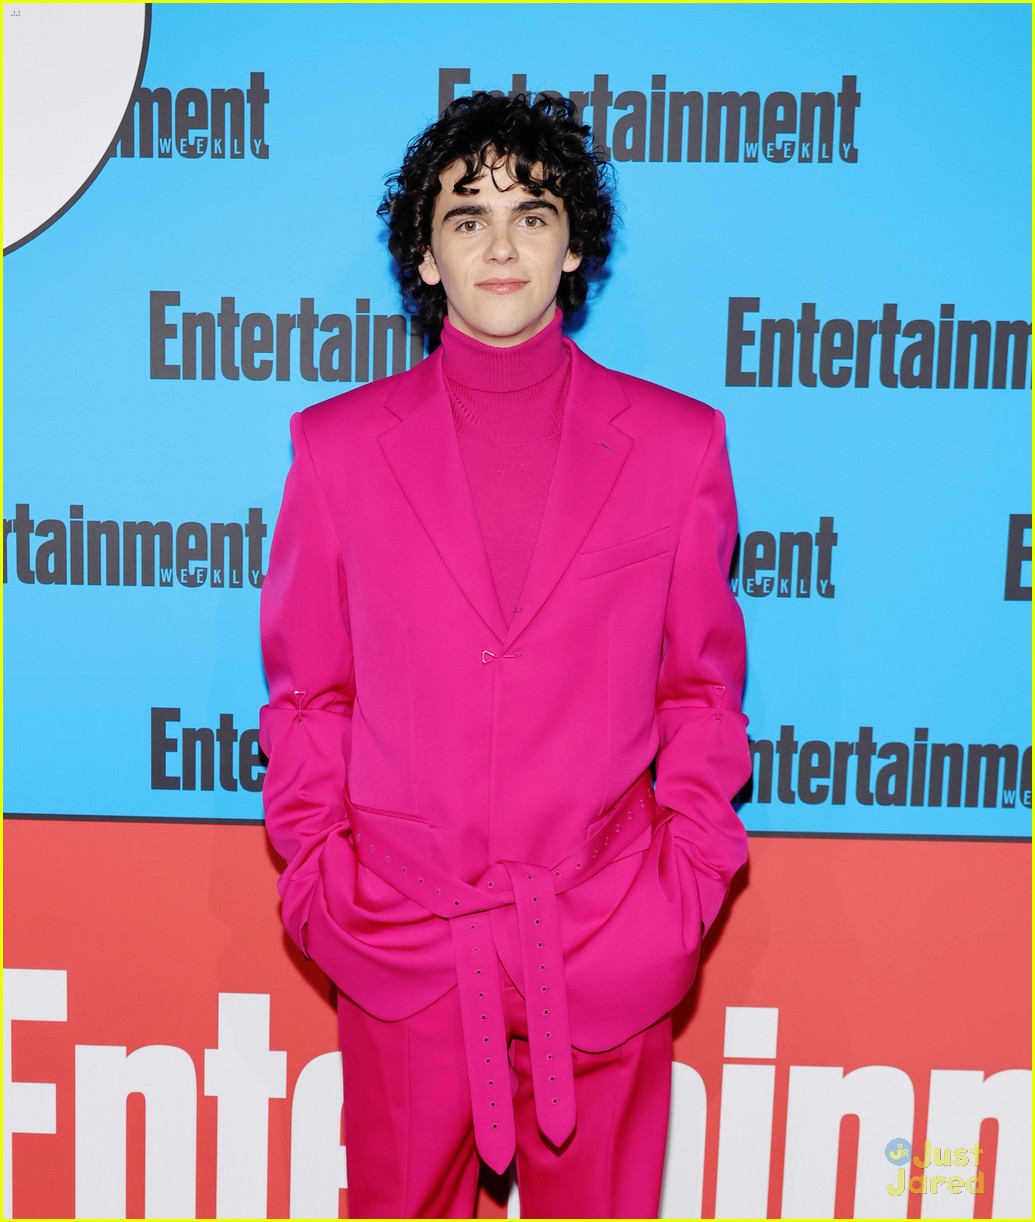 shazams jack dylan grazer asher angel go pink for ew comic con party 18